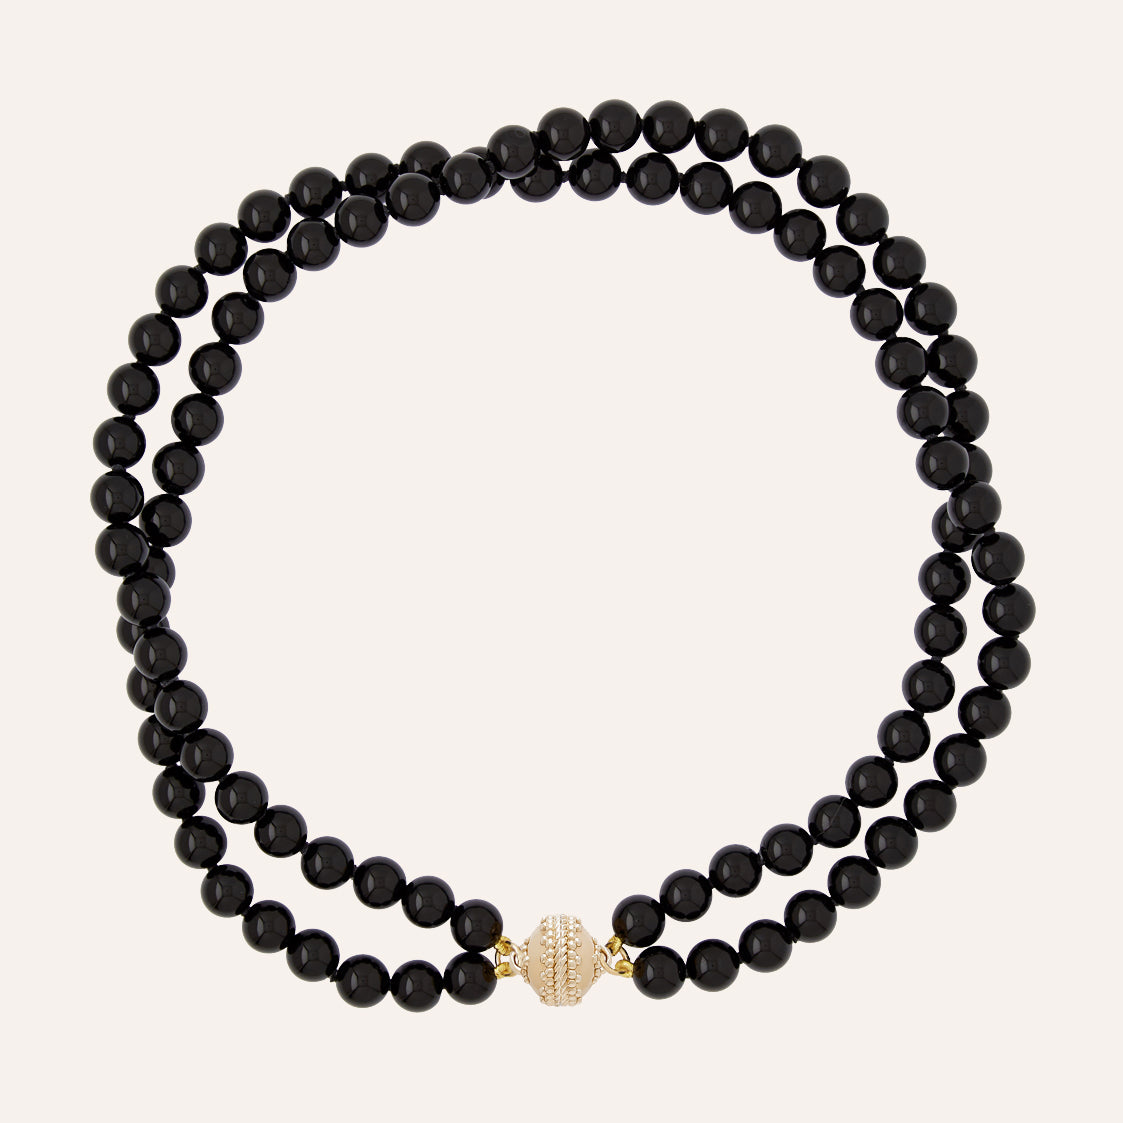 Victoire Black Onyx 8mm Double Strand Necklace